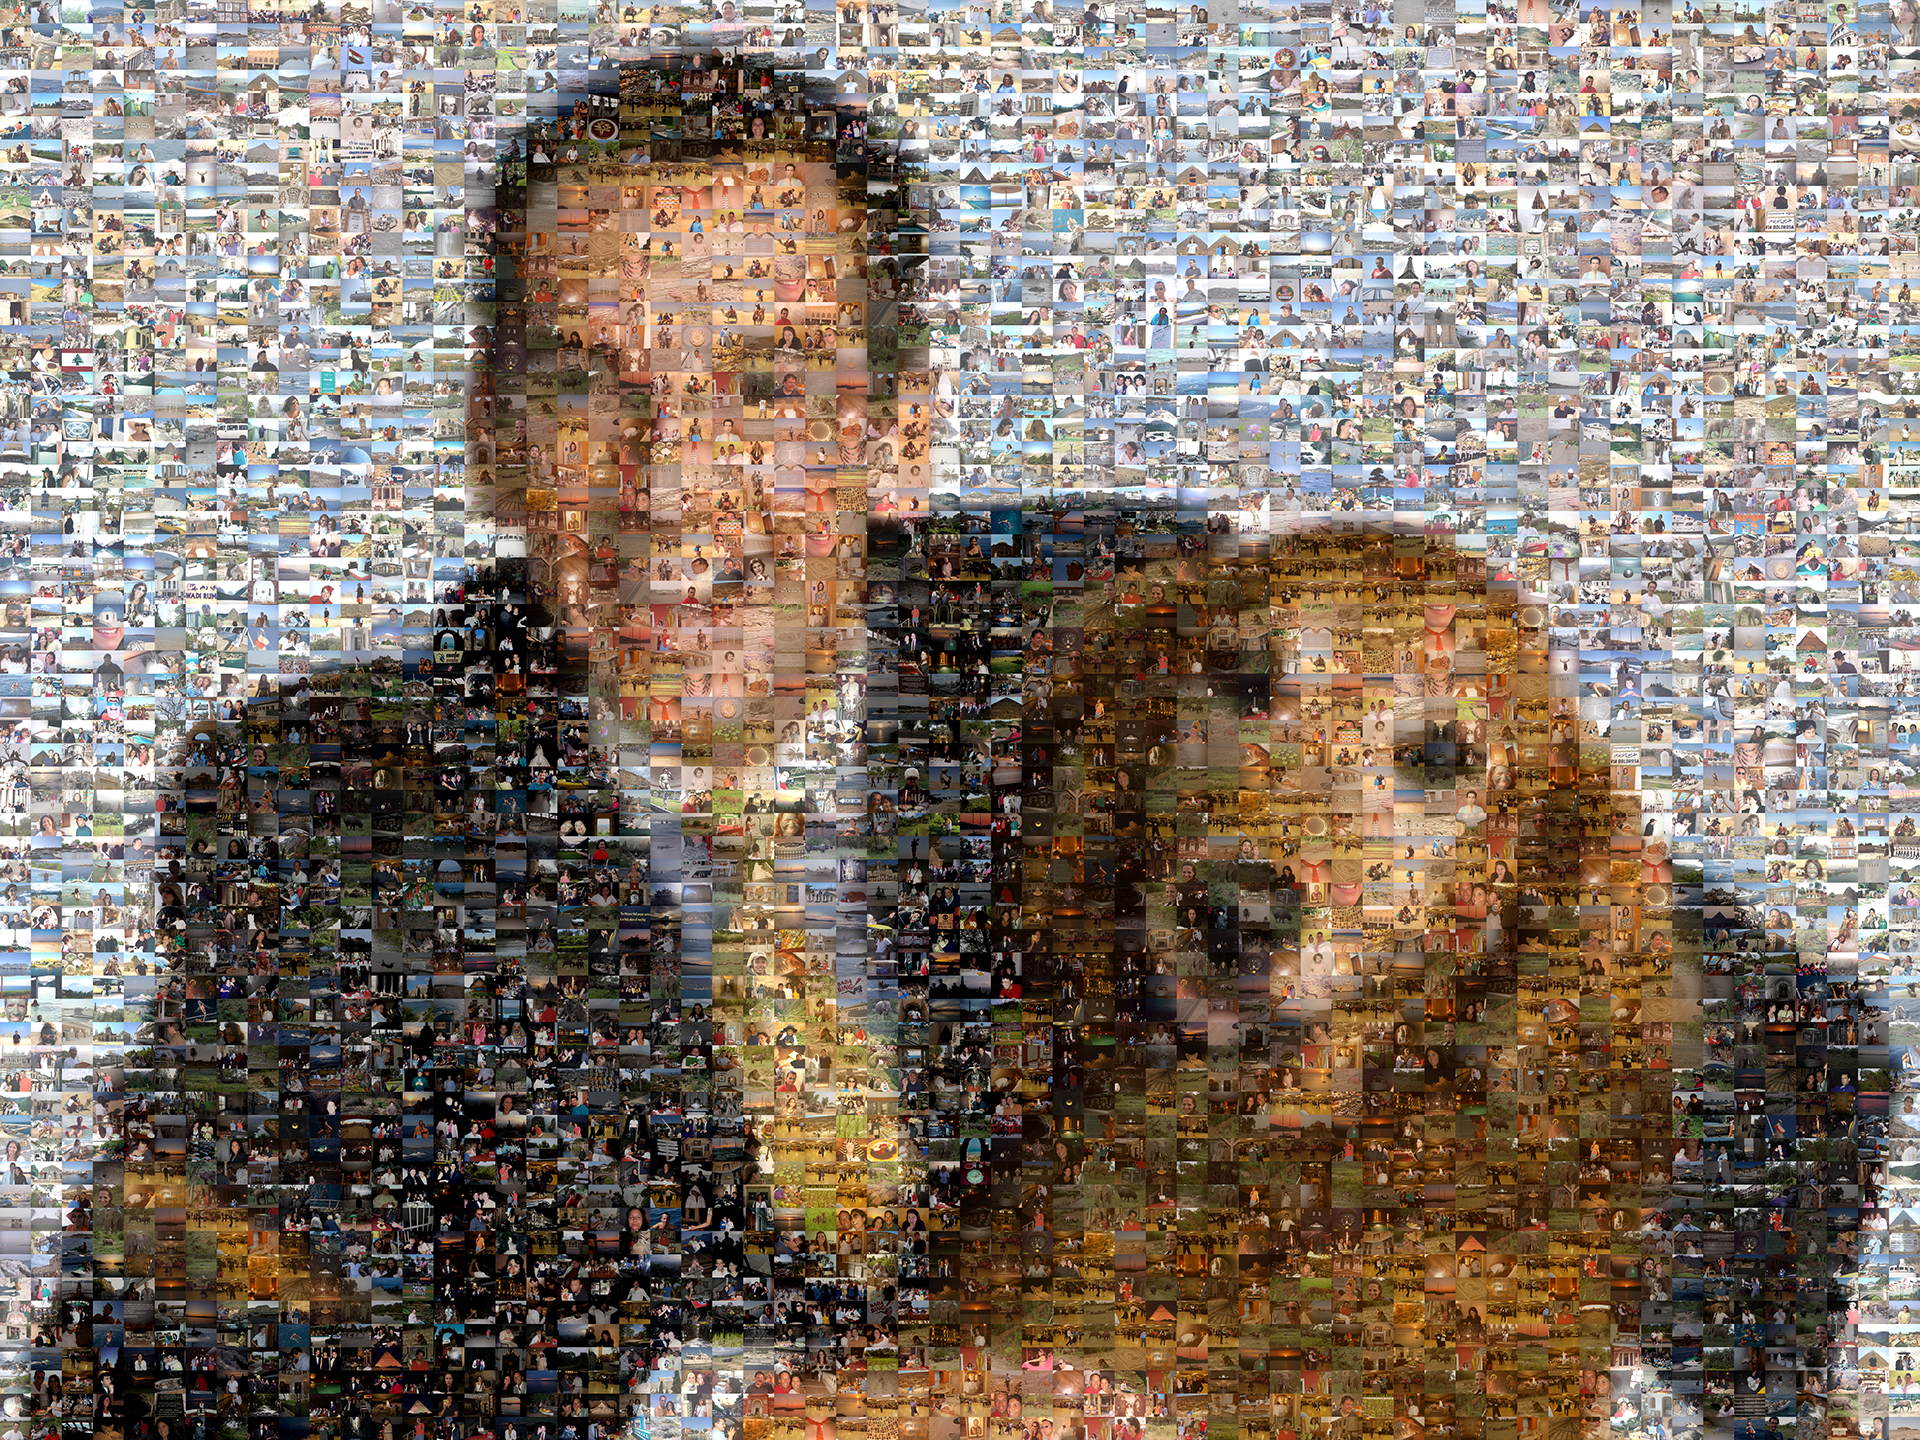 photo mosaic Man's best friend using over 3000 photos from his travels